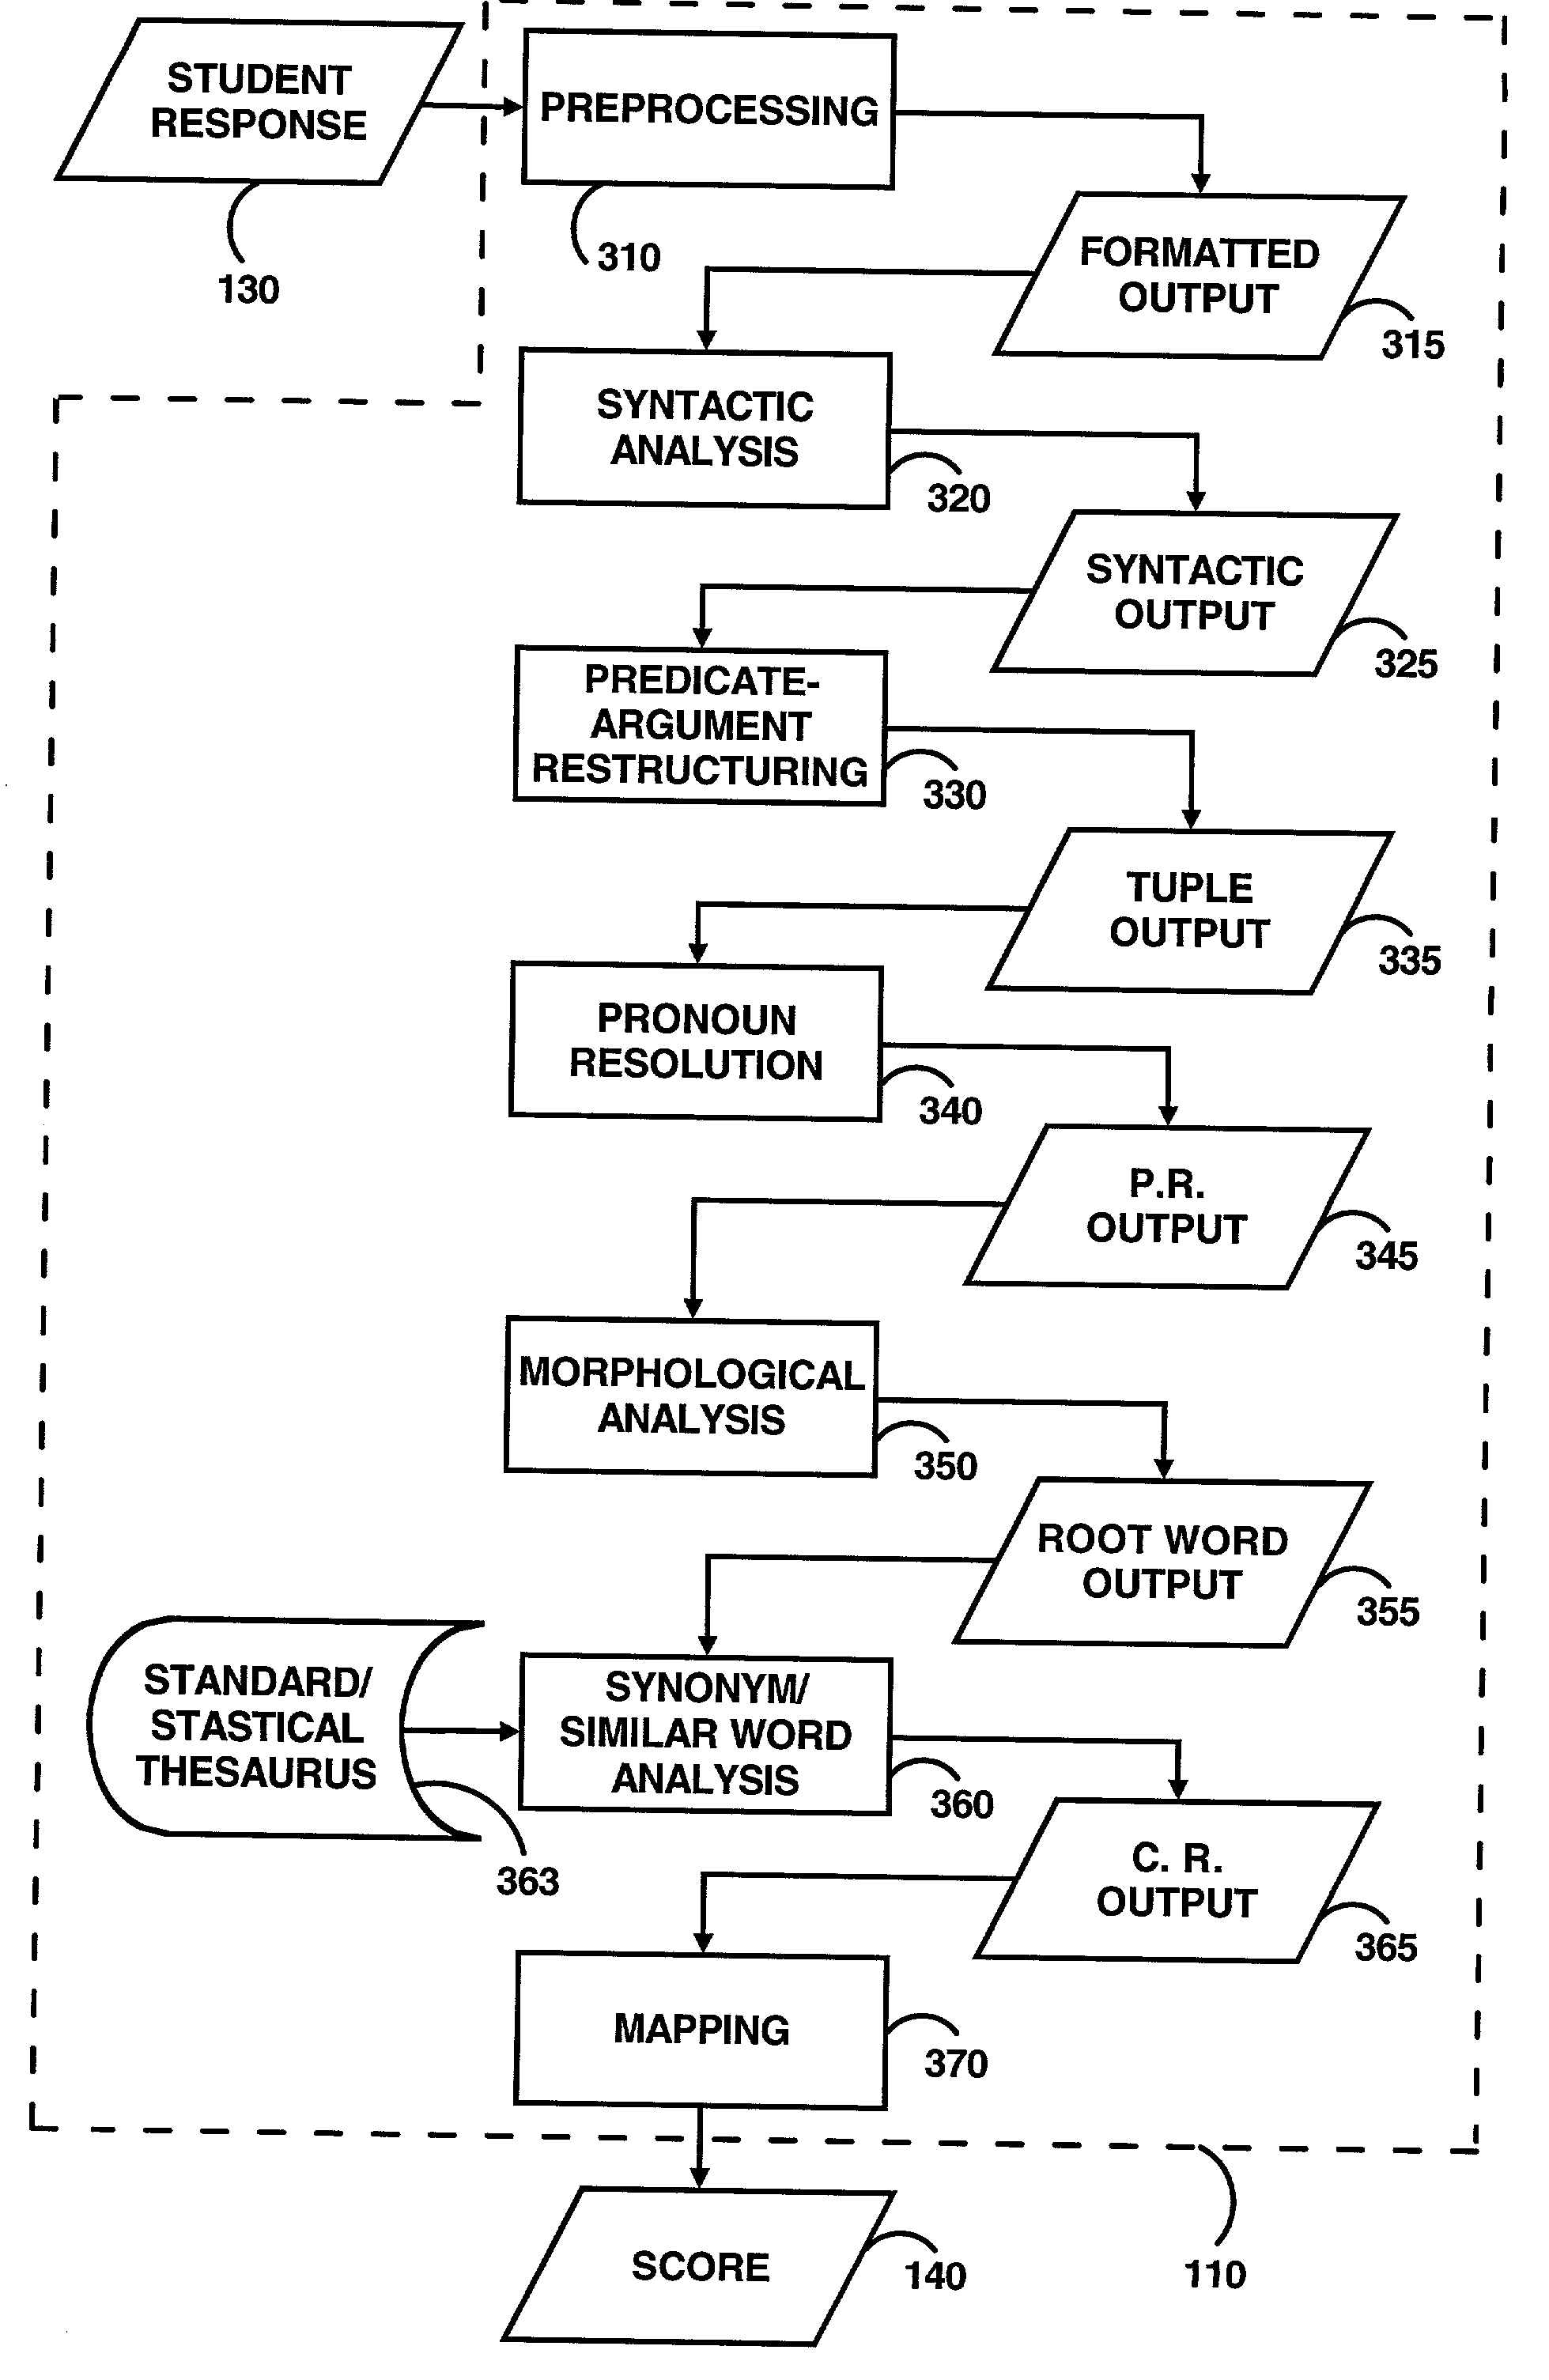 System for rating constructed responses based on concepts and a model answer